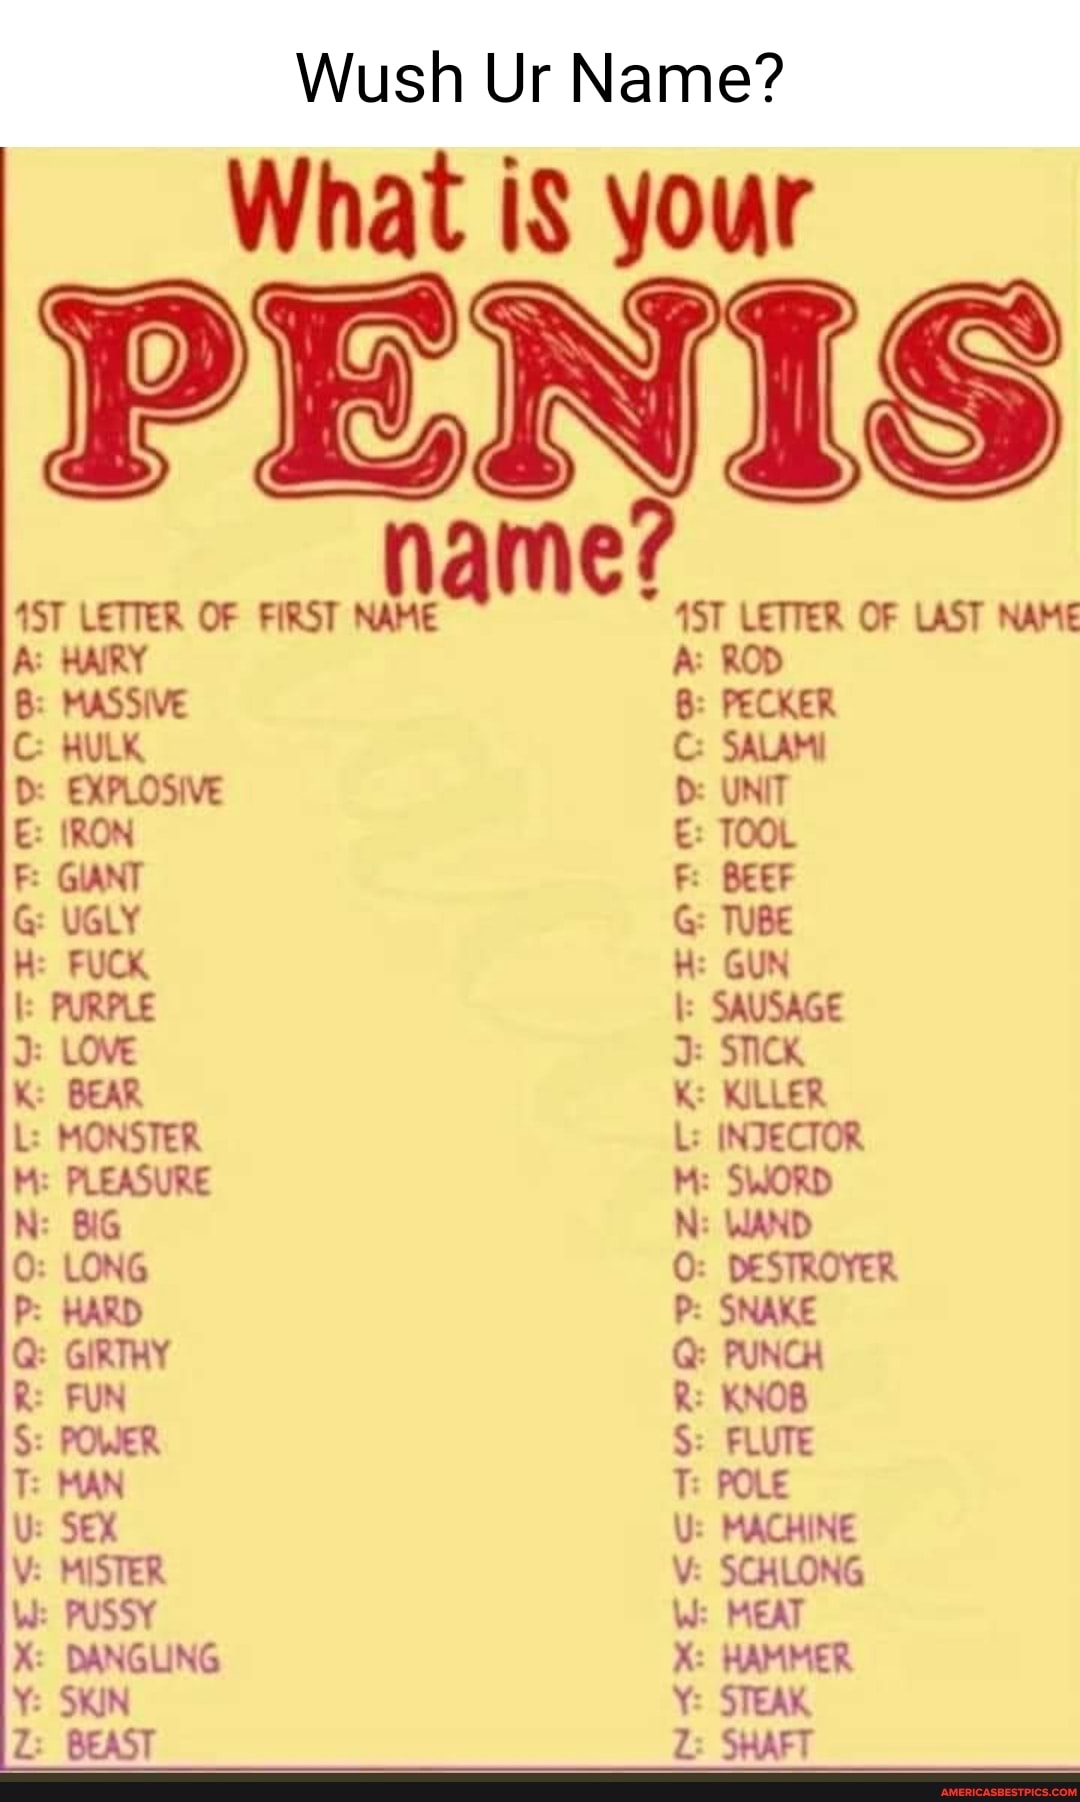 Wush Ur Name What Is Your Penis Name Letter Of First Name Letter Of Last Name